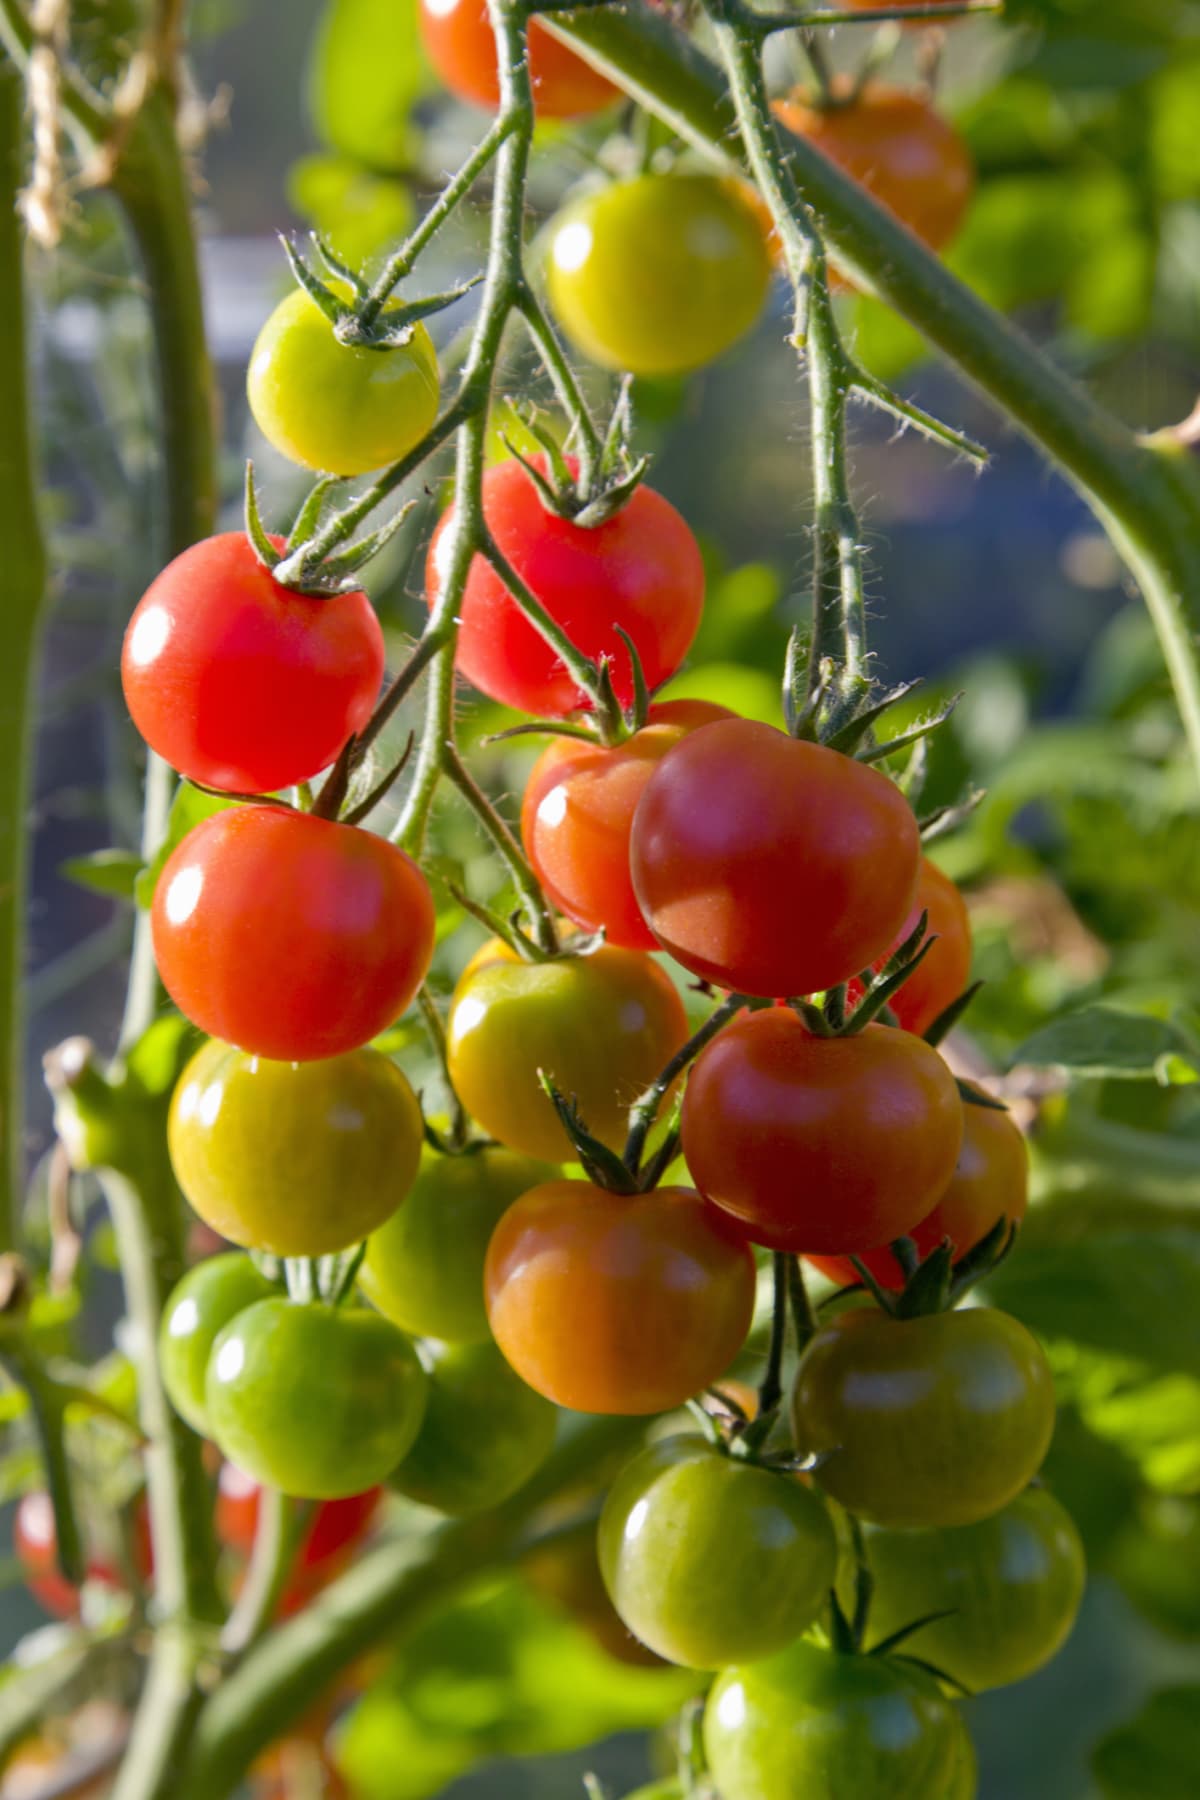 Tomatoes in various stages of ripeness on vine